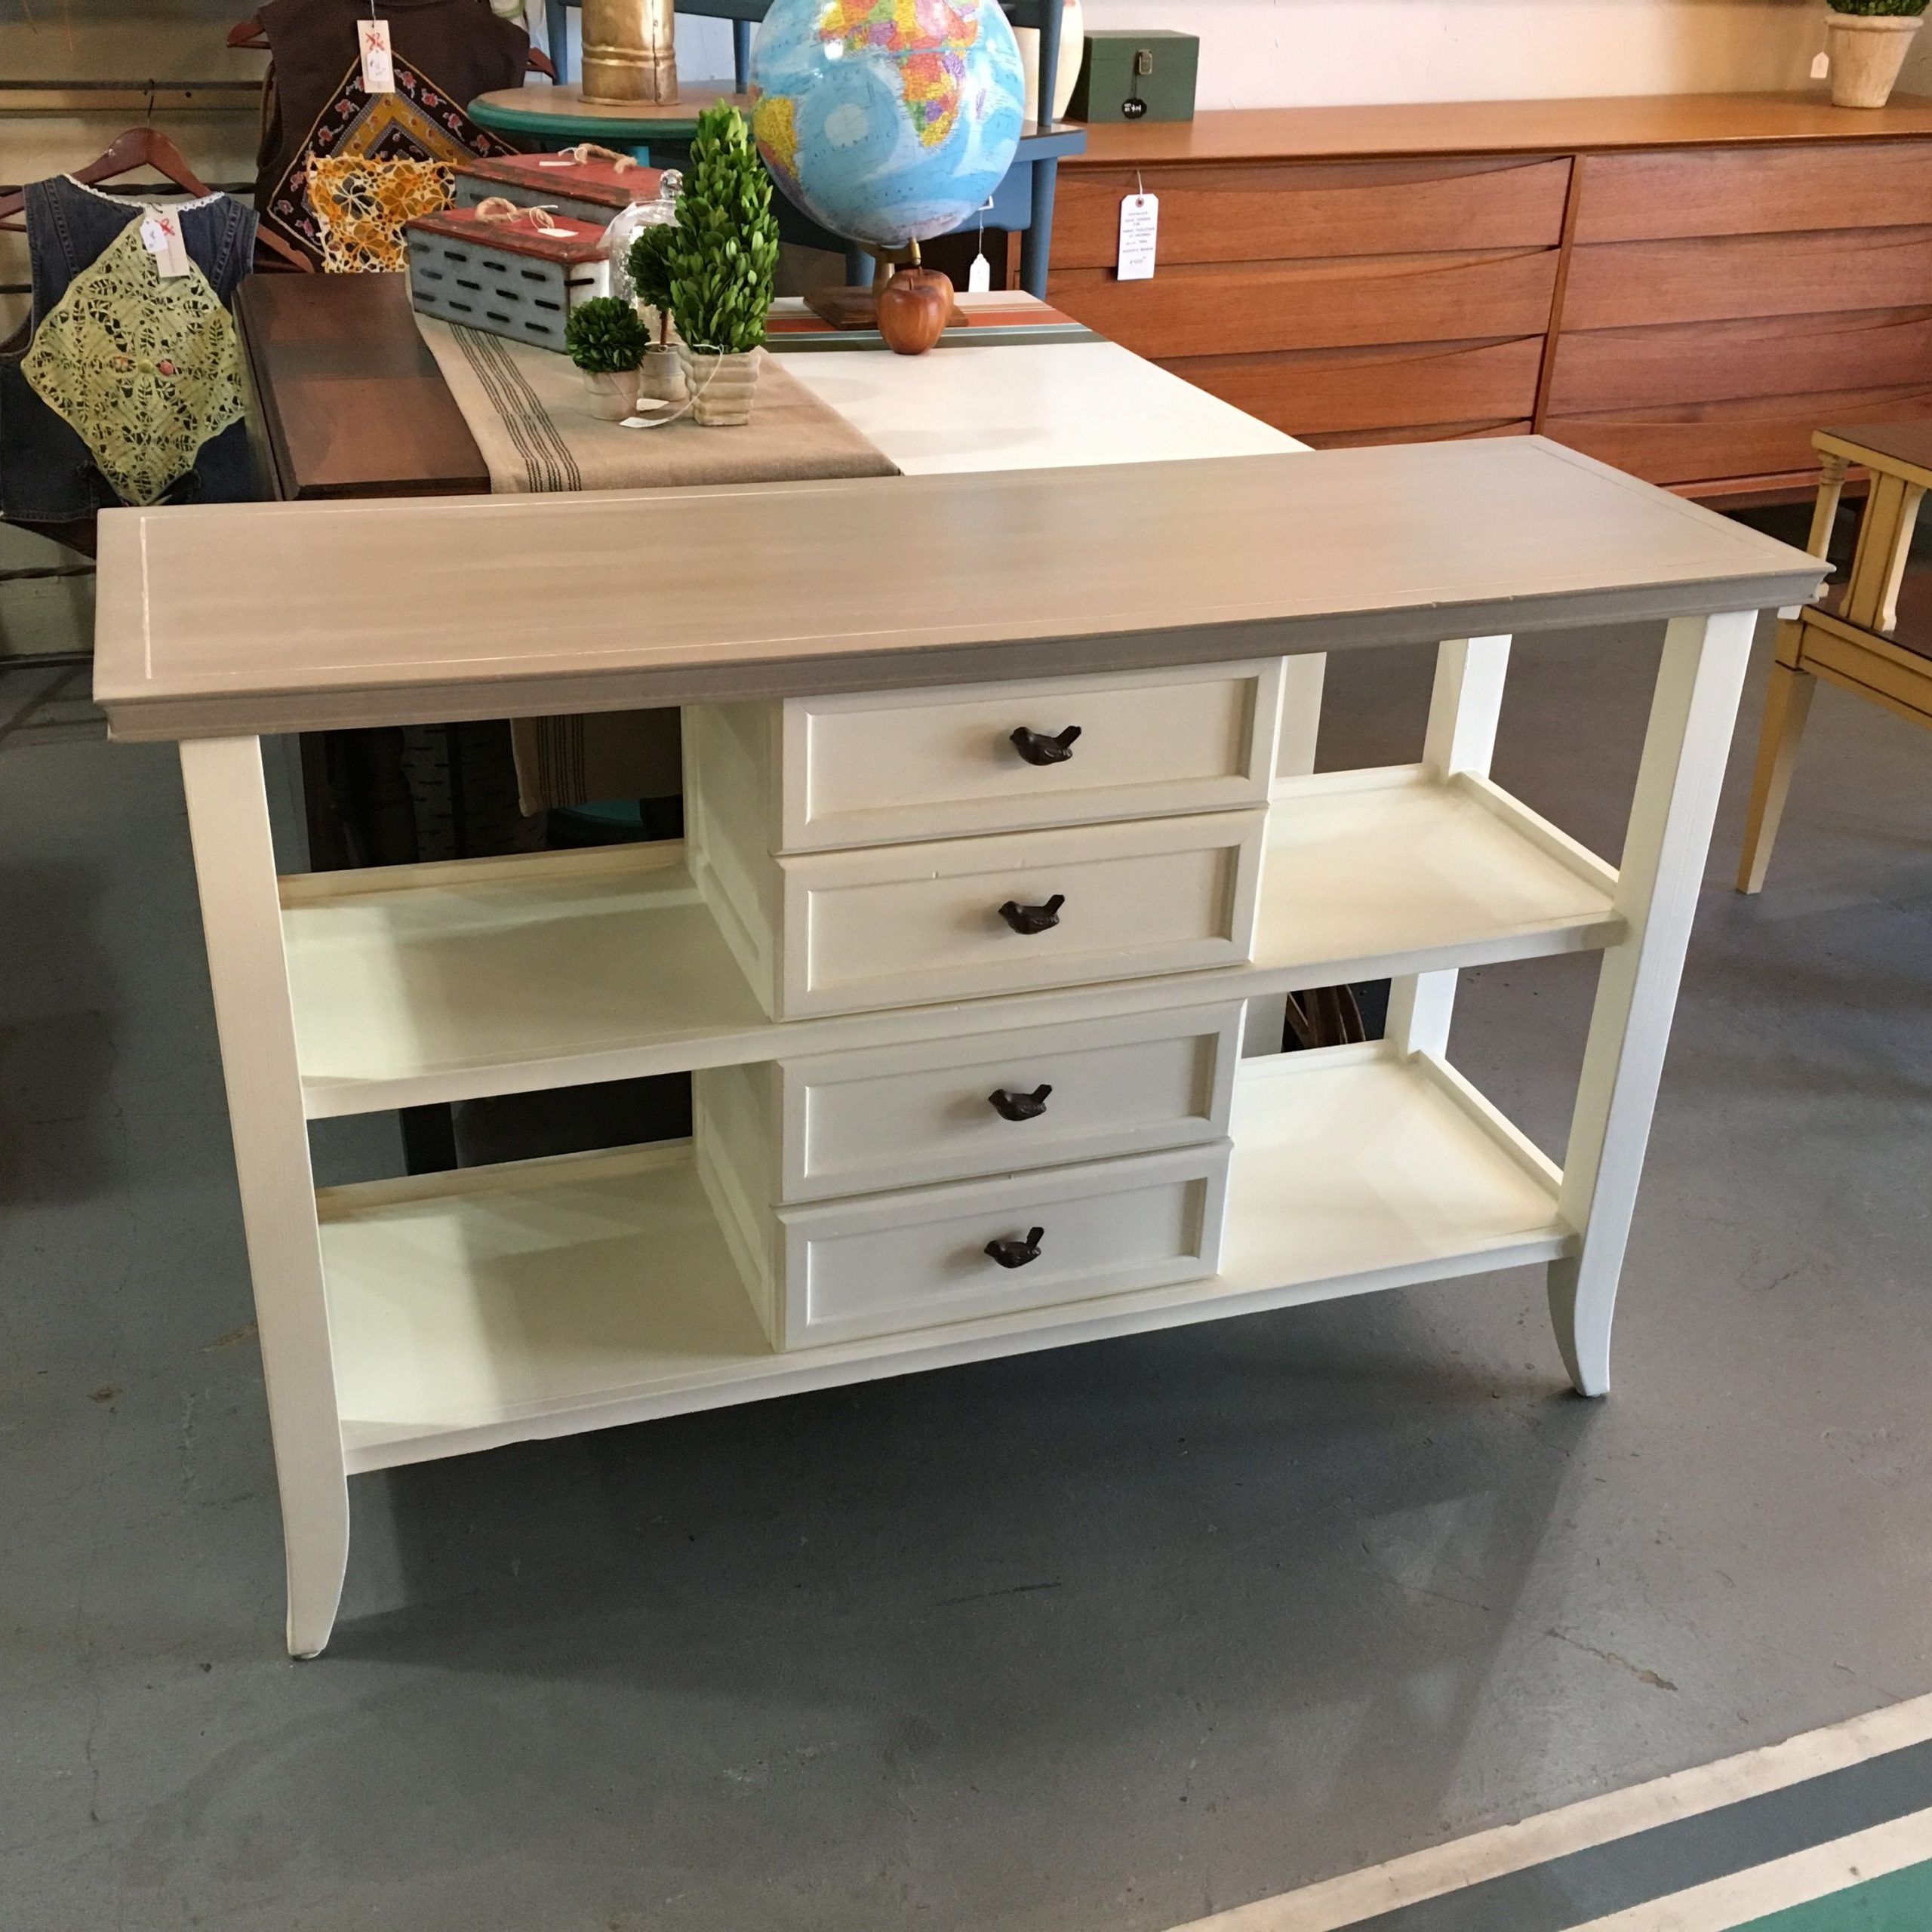 Charming Console Table In Coco Chalk Paint®annie Sloan With A Intended For Oceanside White Washed Console Tables (View 20 of 20)